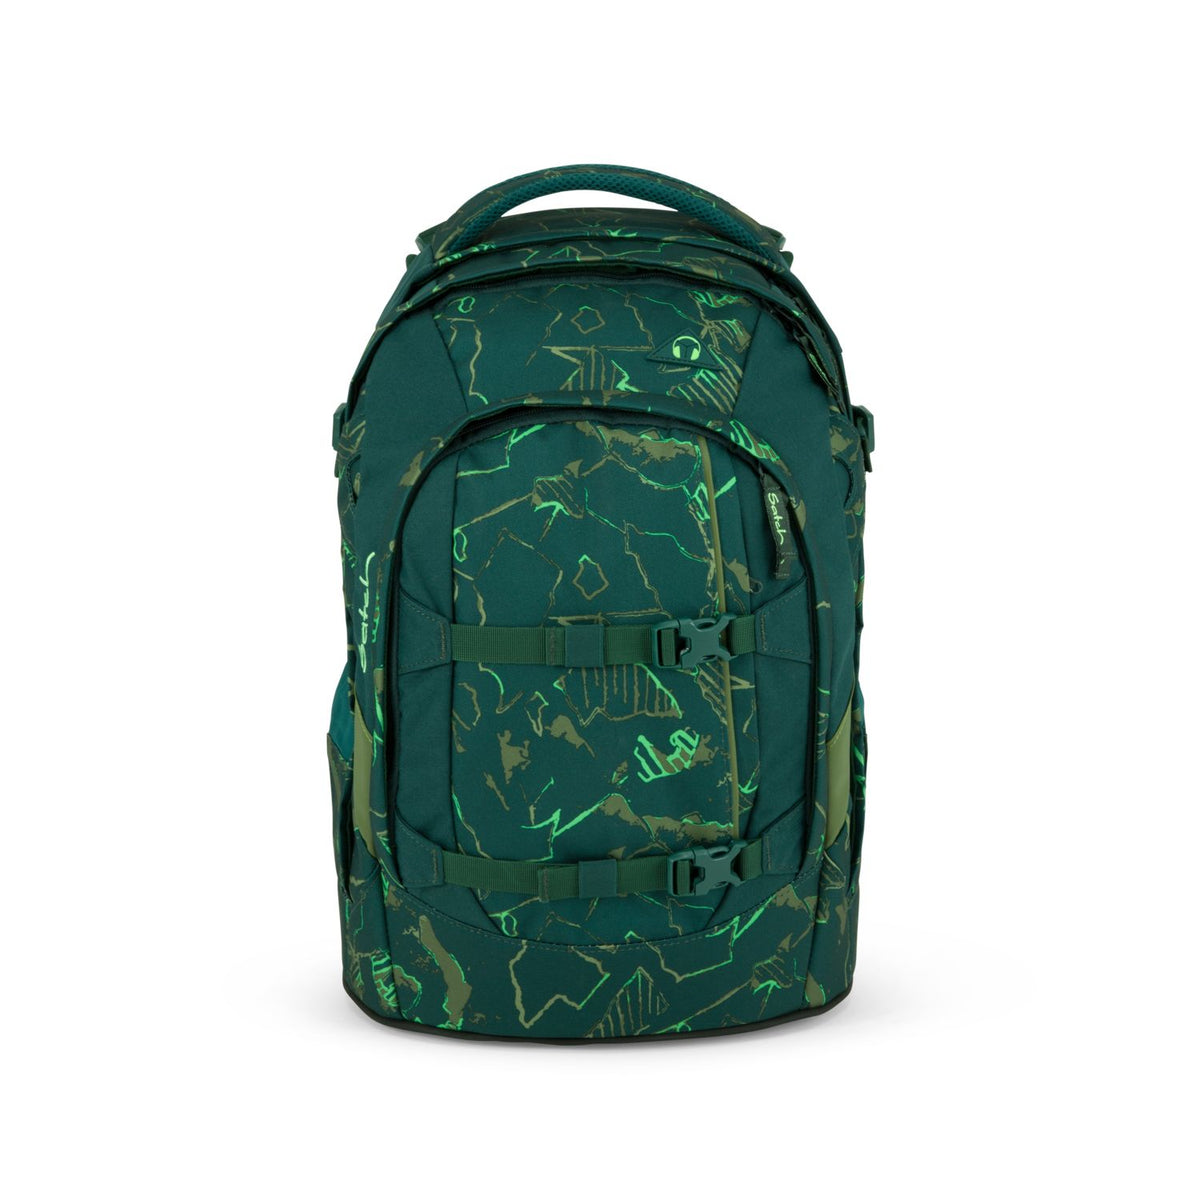 Satch pack ergonomic school backpack for teenagers